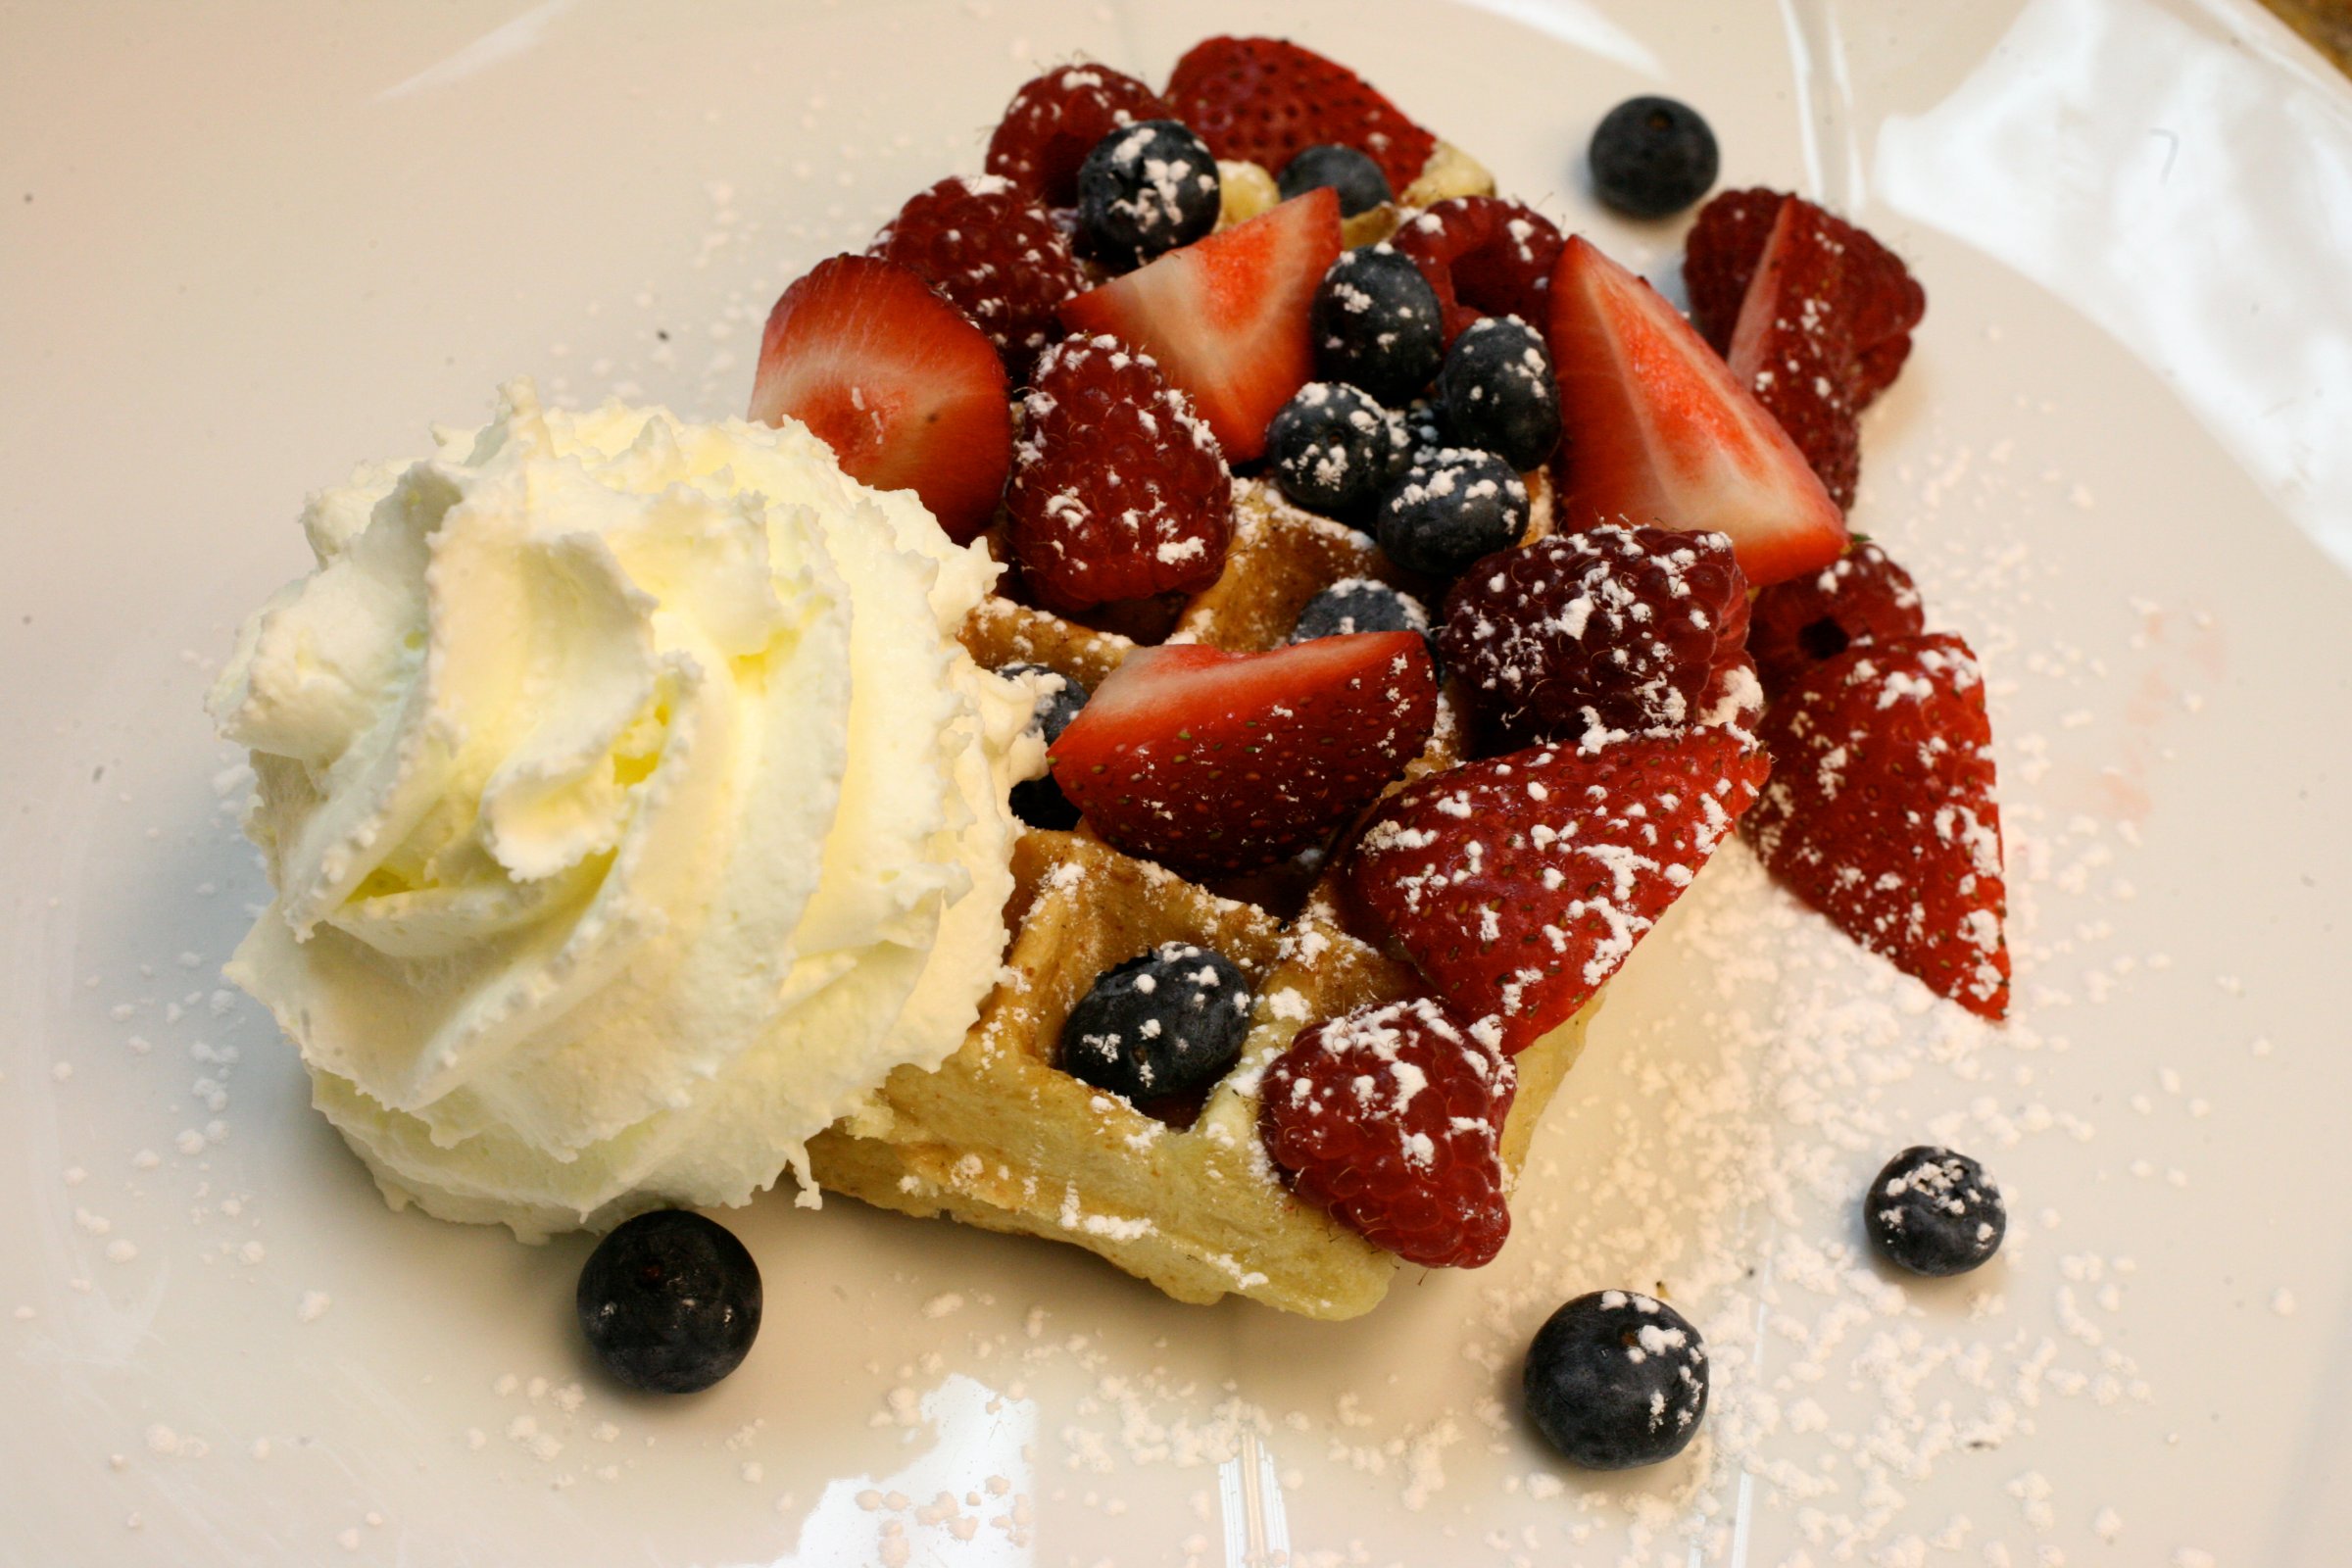 Liege waffle with fresh berries and whipped cream at Locolat in Washington, DC.